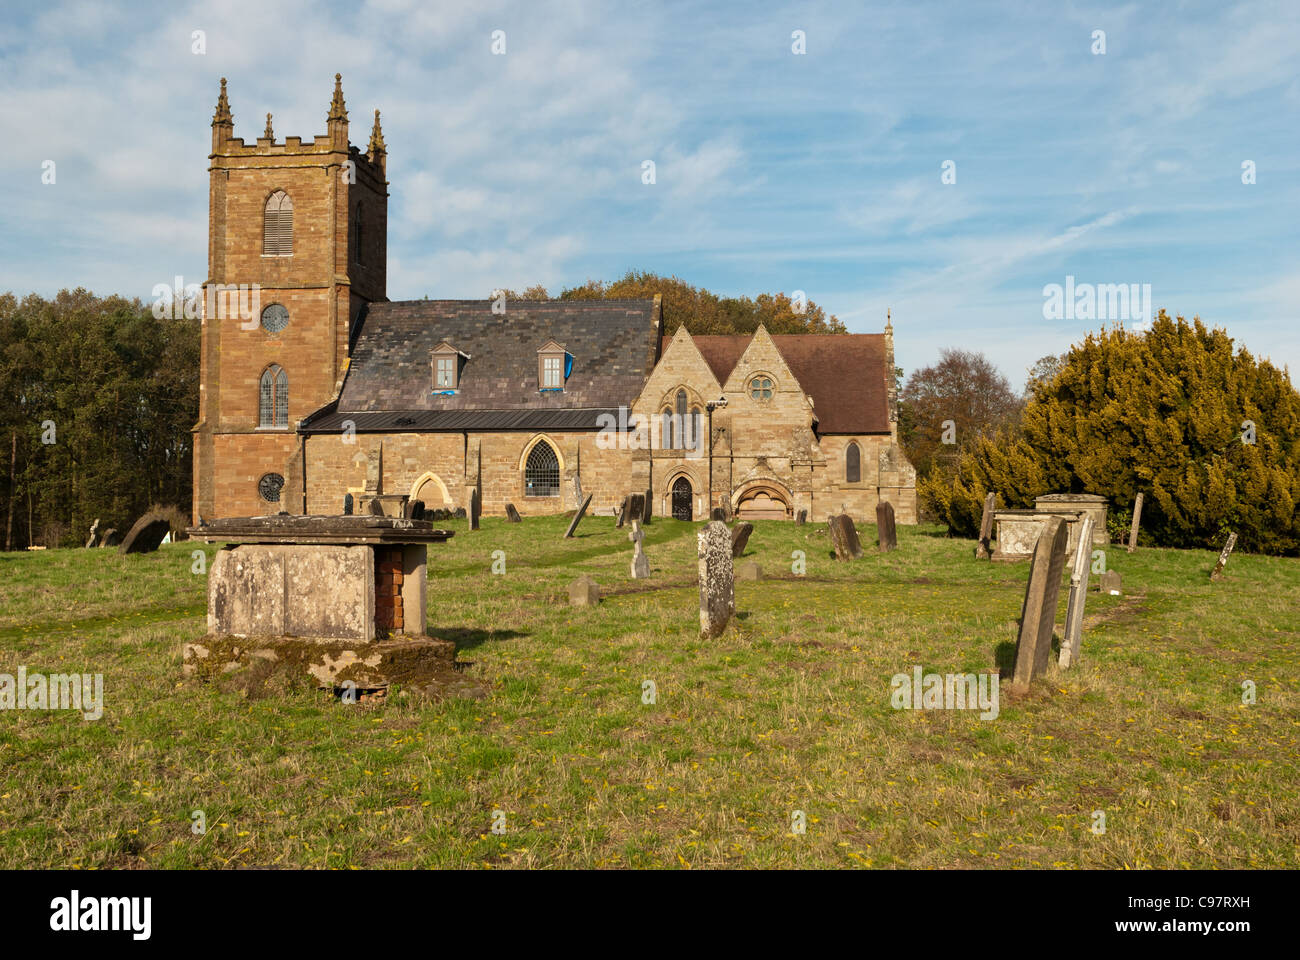 Hanbury church in worcestershire lit by autumn sunlight Stock Photo